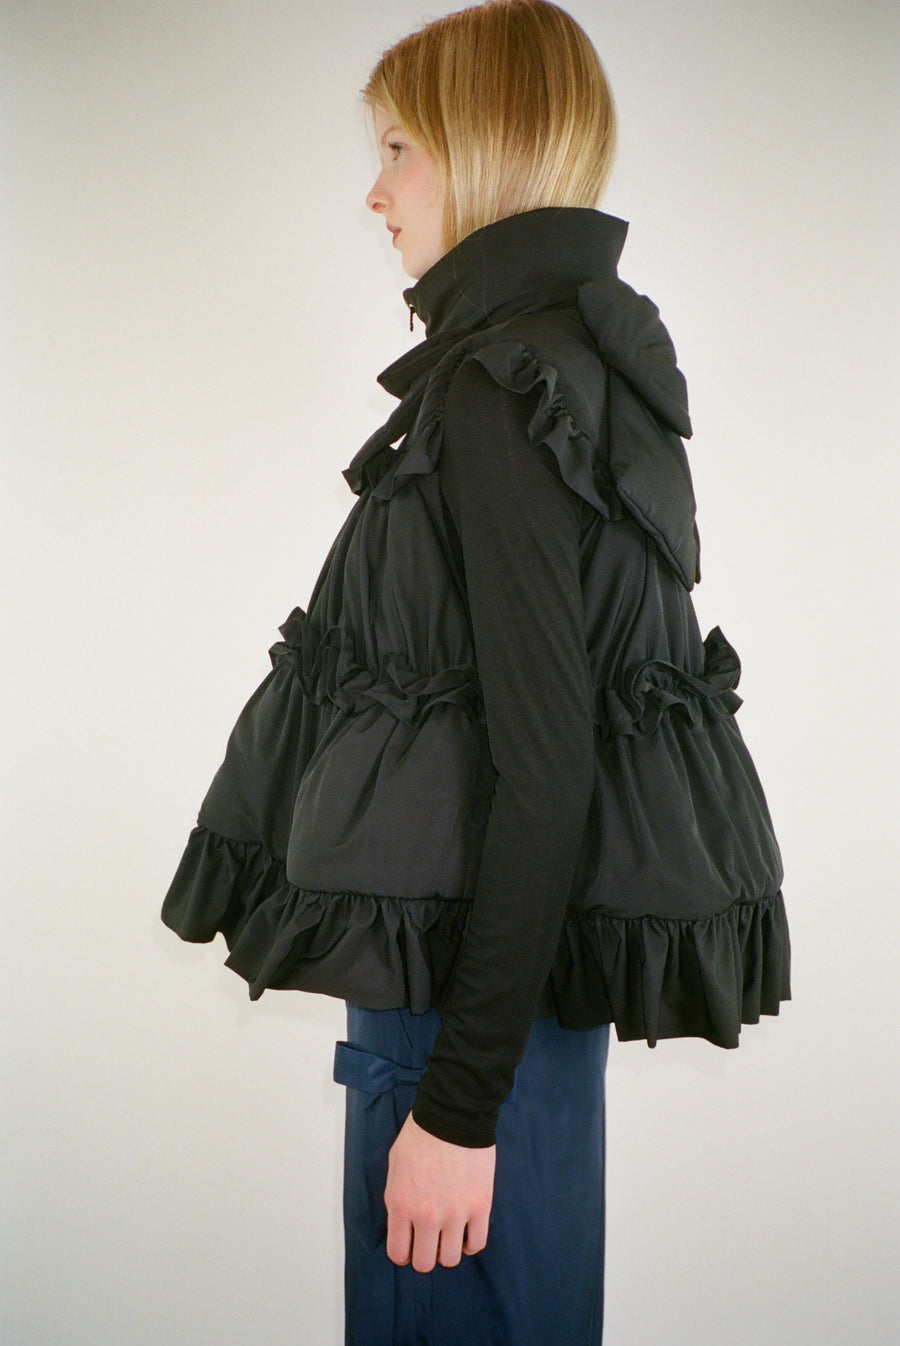 Puffer vest in black with ruffle details on model